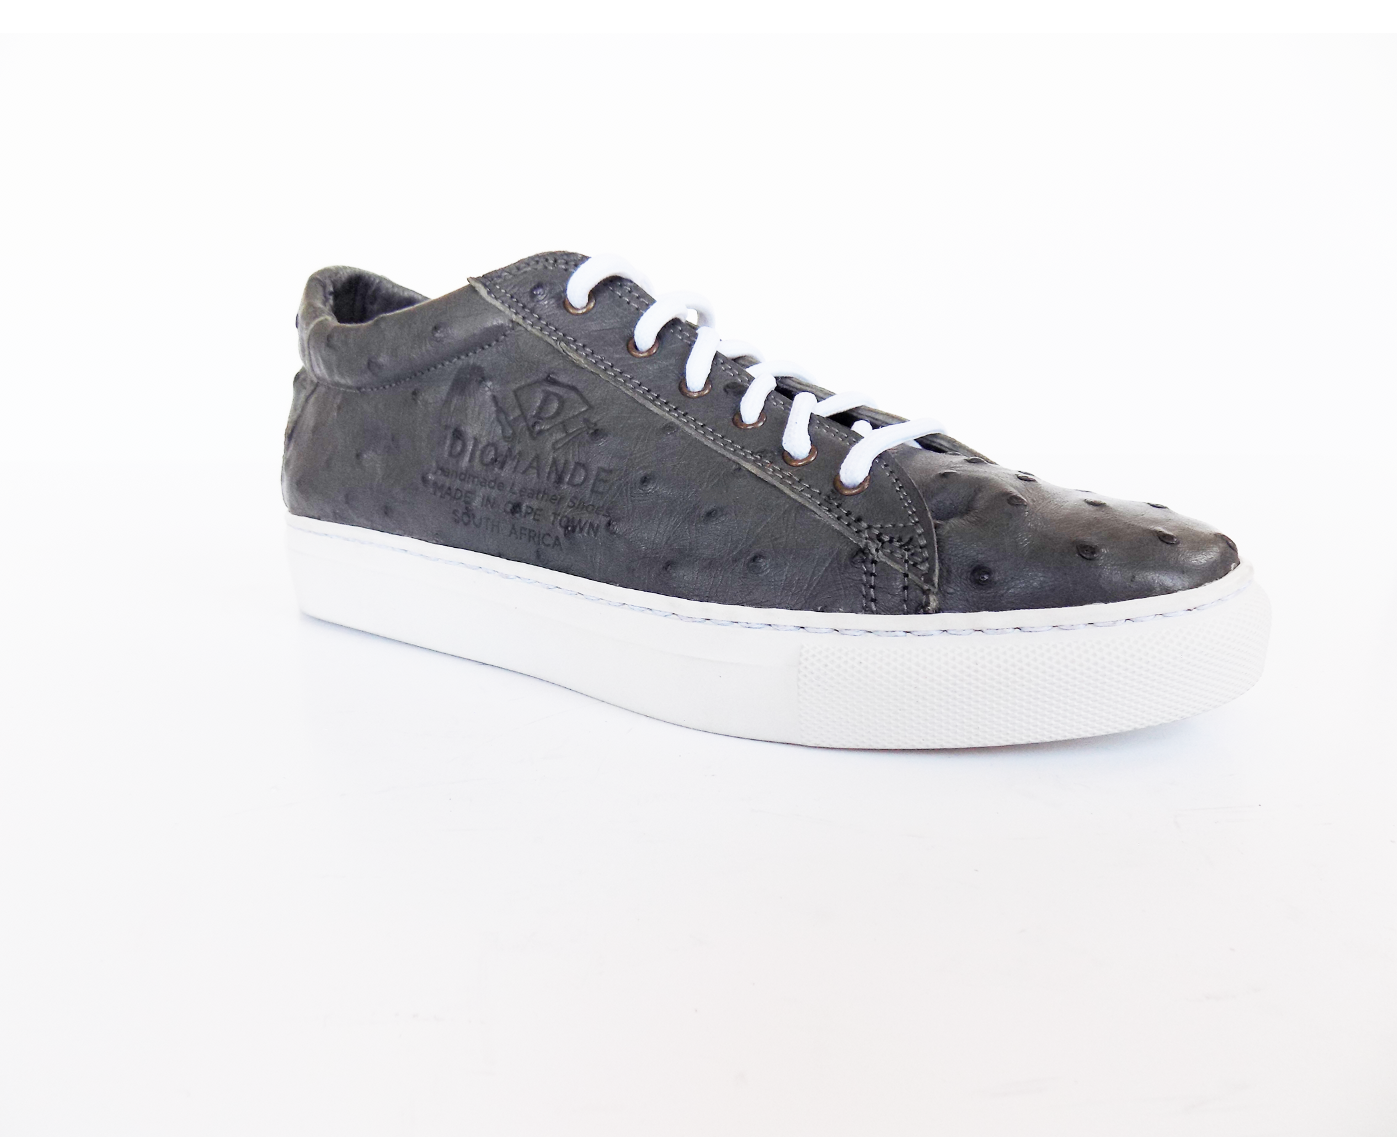 Oyster Ostrich Sneaker | Diomande Shoes